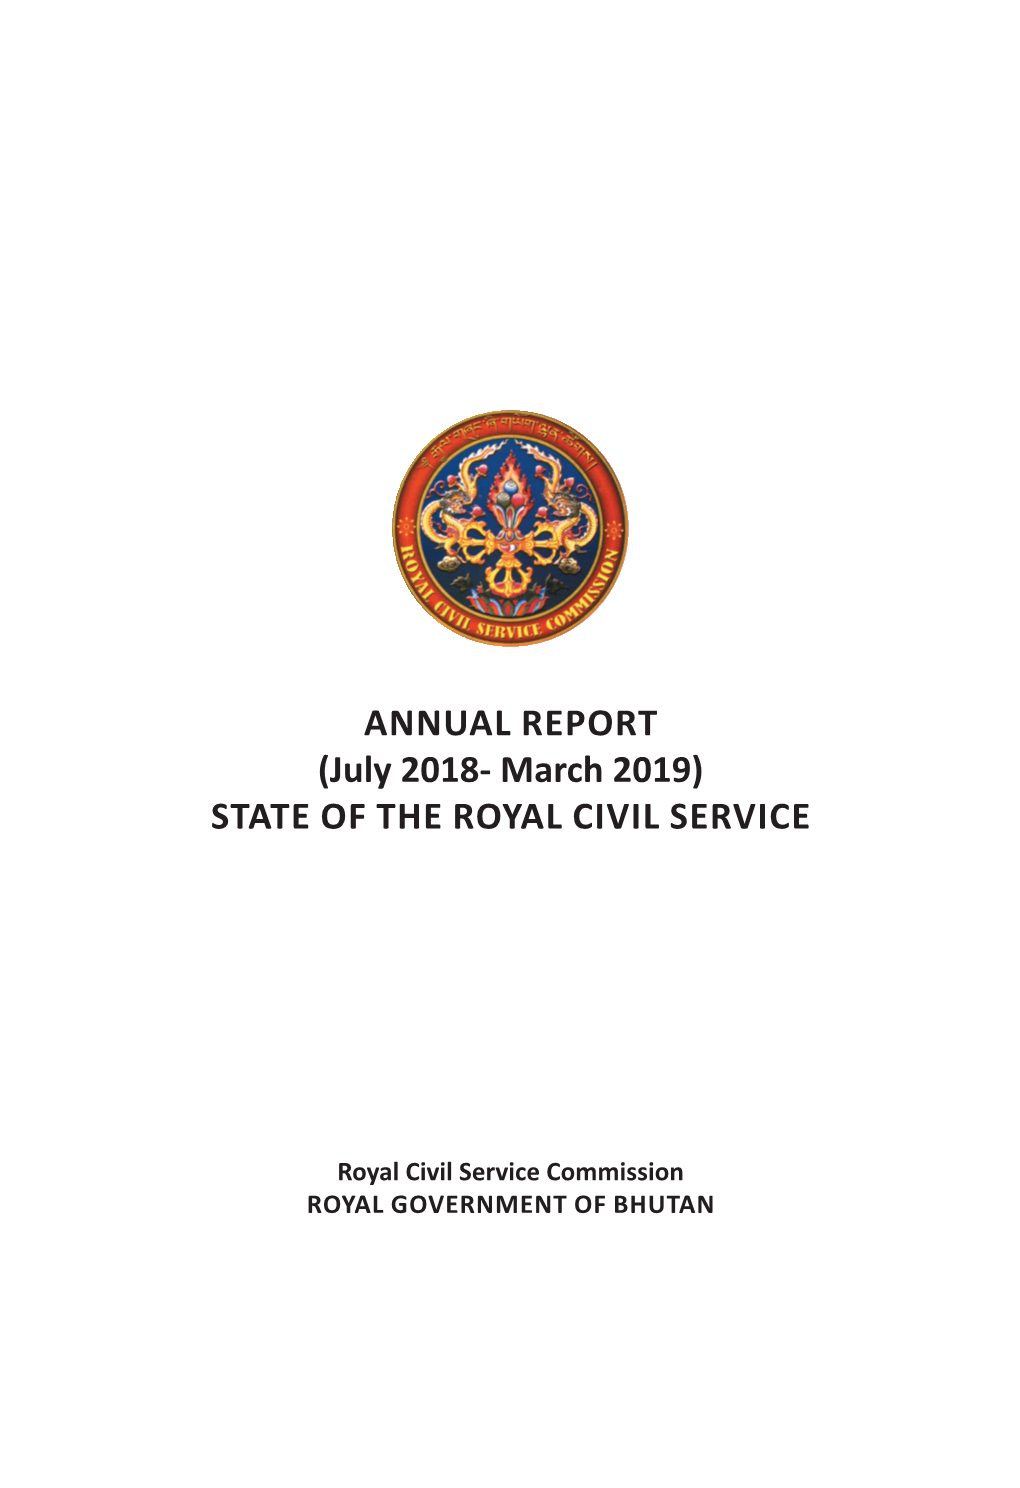 Annual Report (July 2018- March 2019) State of the Royal Civil Service